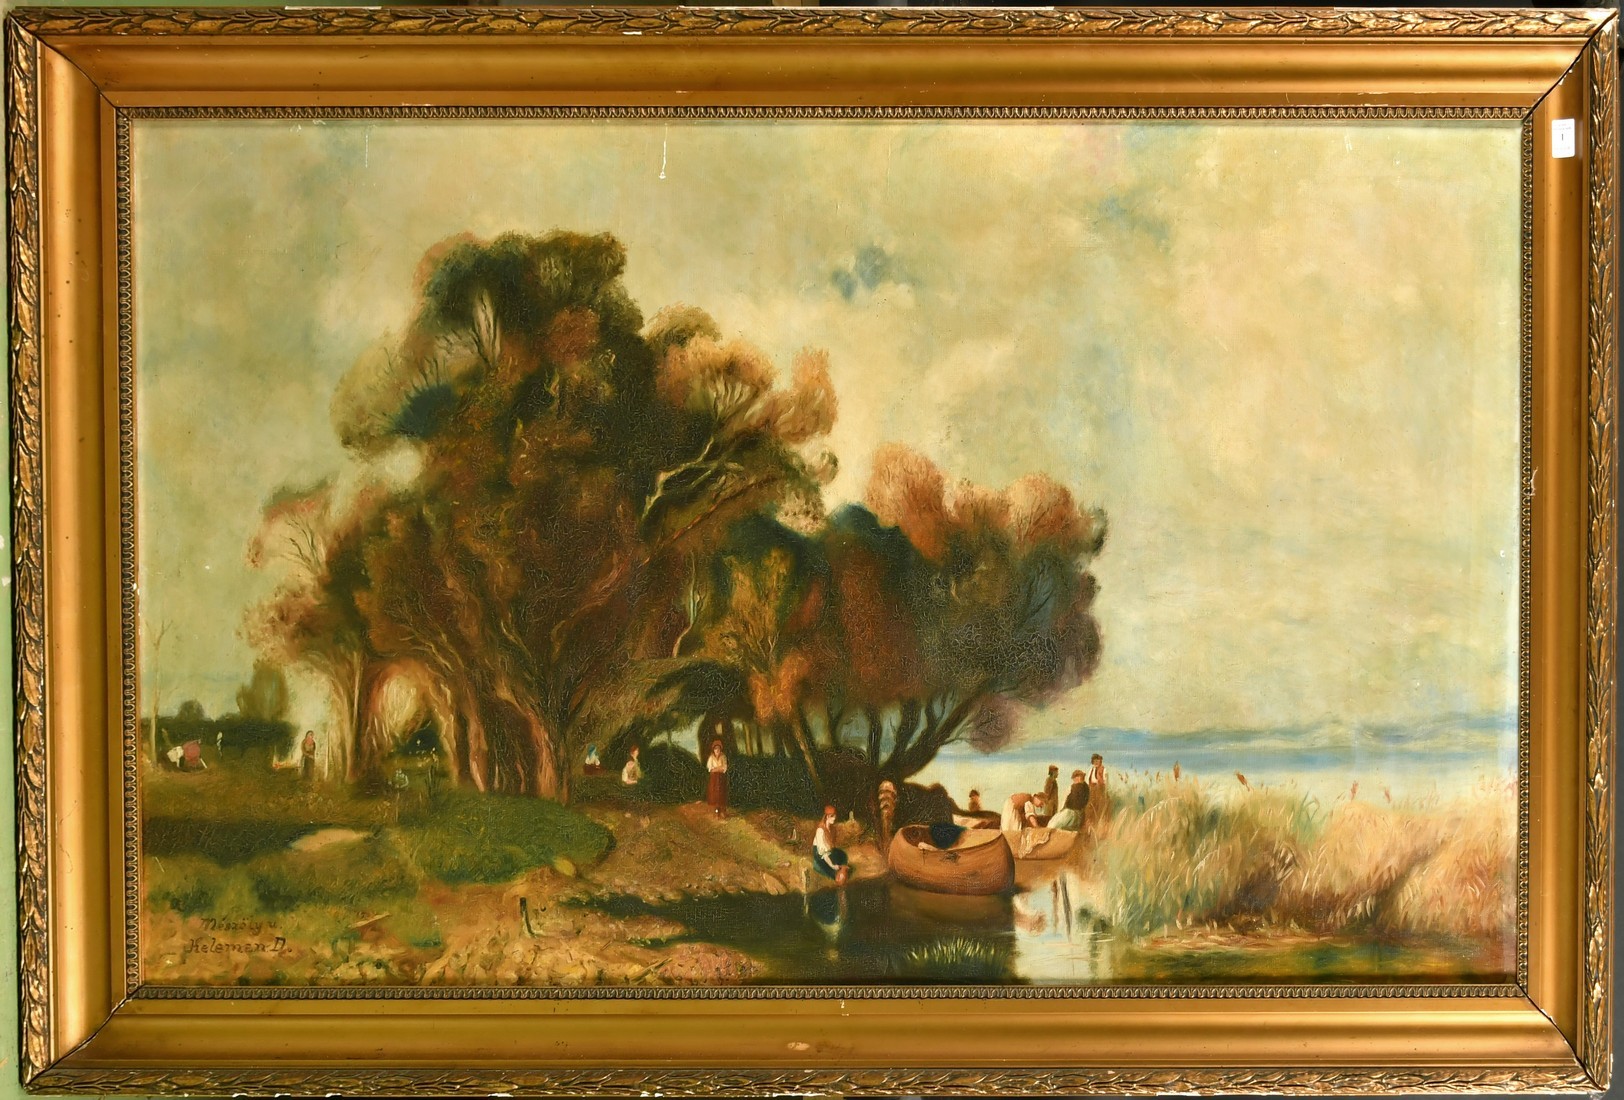 Kelemen (Early 20th Century), figures gathered by the water's edge, oil on canvas, signed, 29.5" x - Image 3 of 3